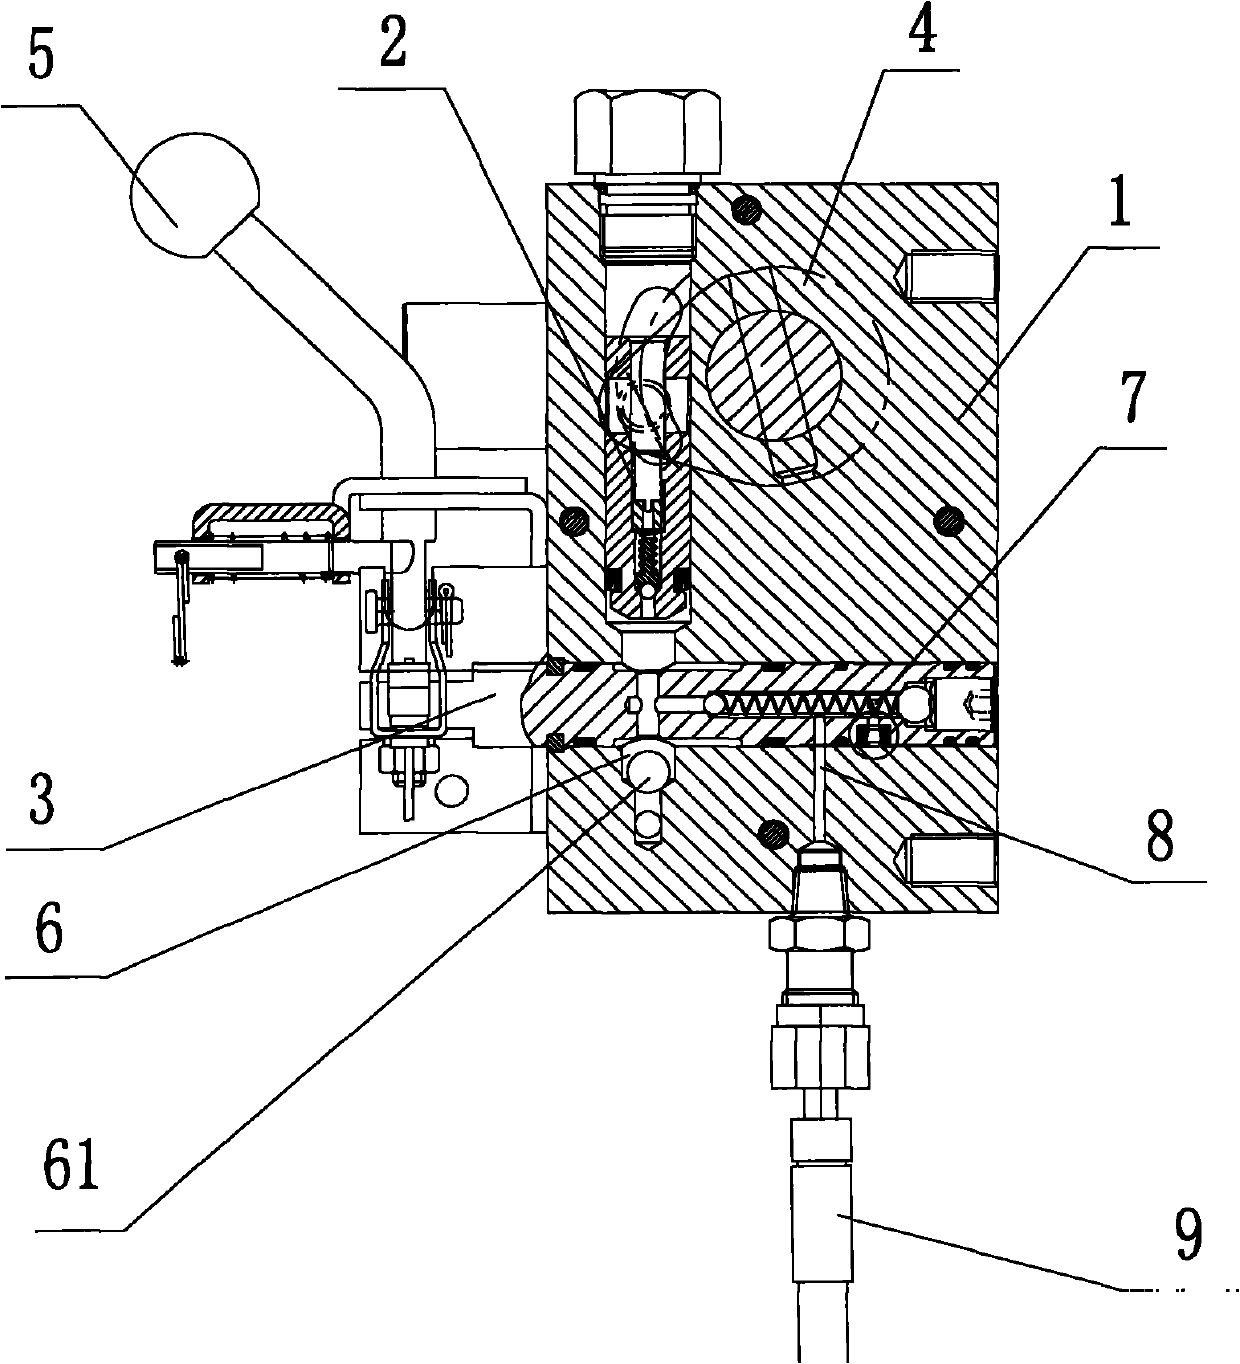 Hydraulic pump assembly of turnover device for automobile cab